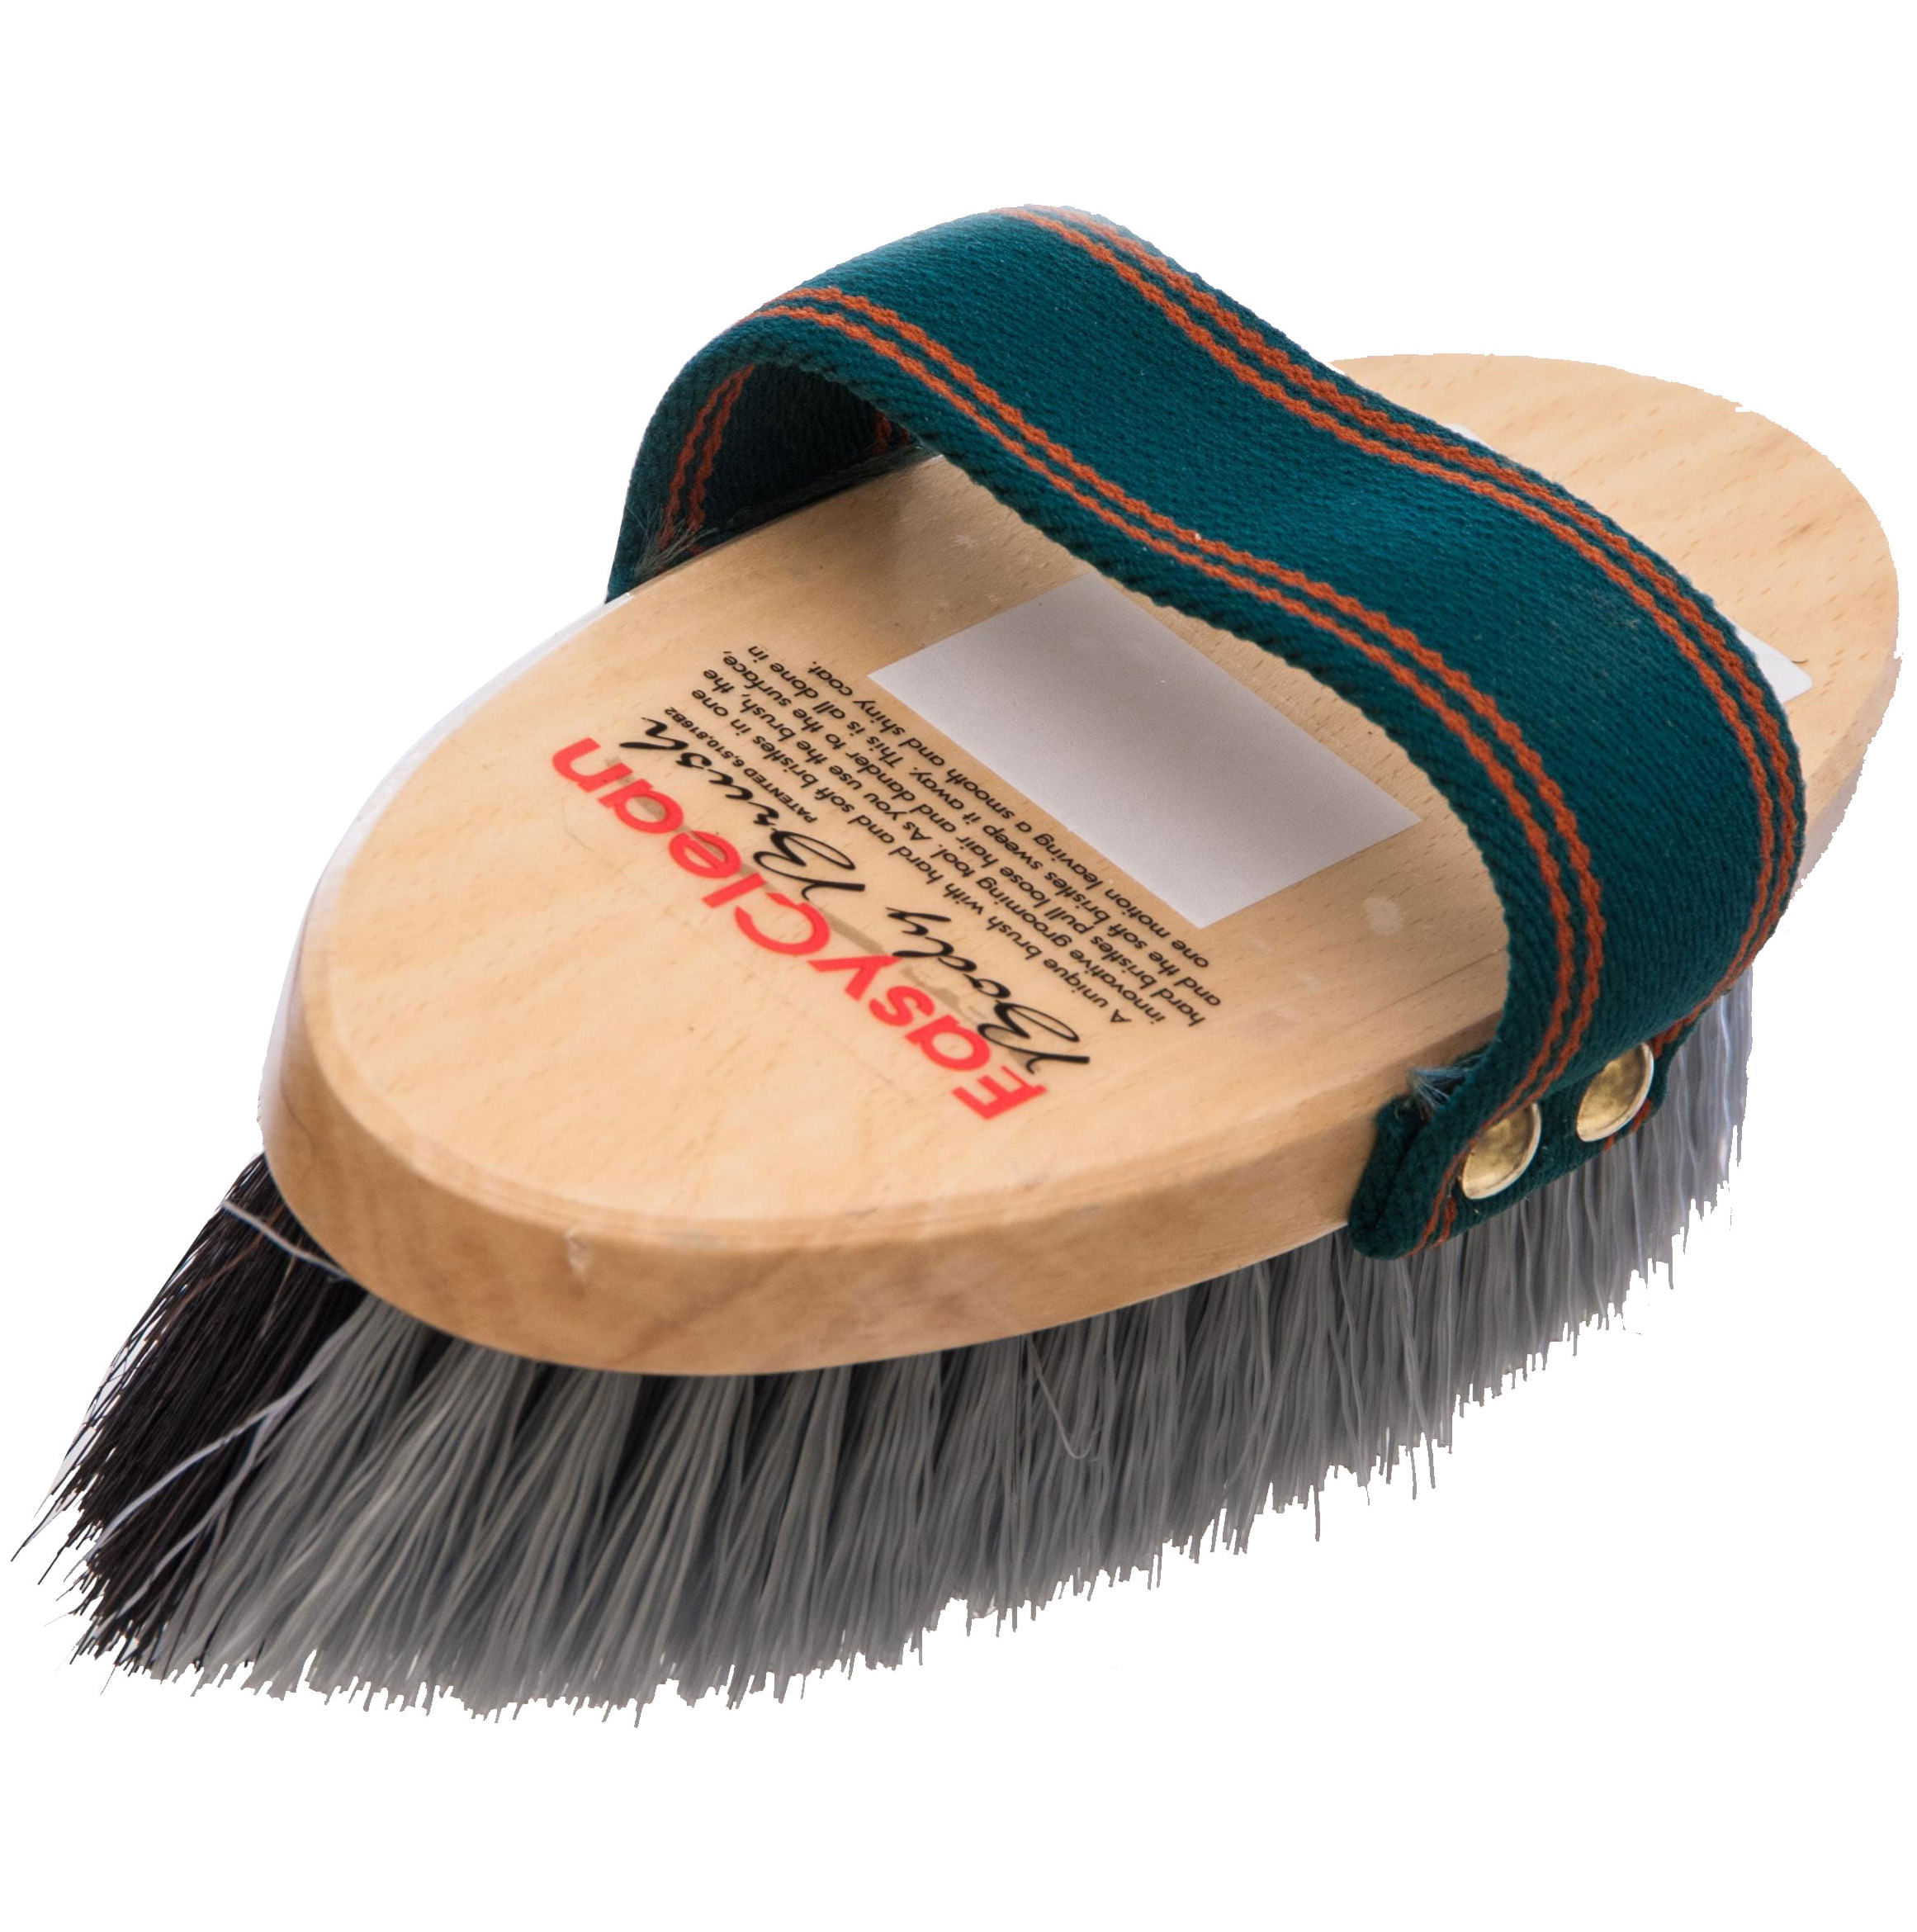 Vale Easy Clean Body Brush with Hard and Soft Bristles for Horse Grooming 